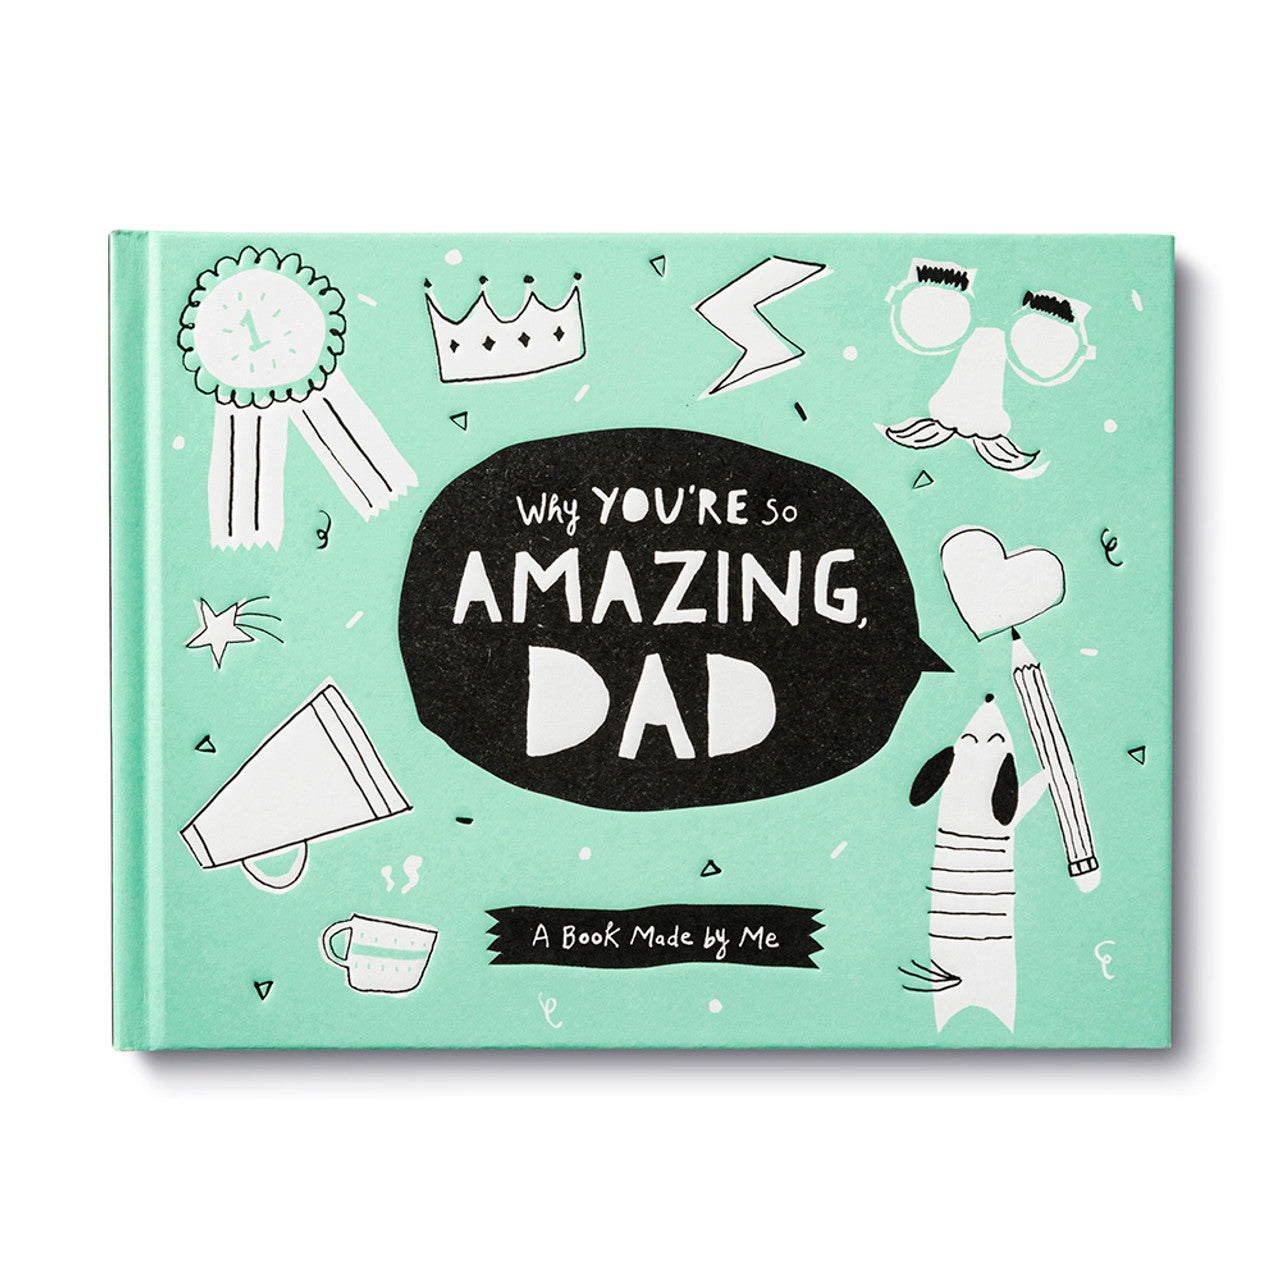 Why You're So Amazing Dad Gift Book